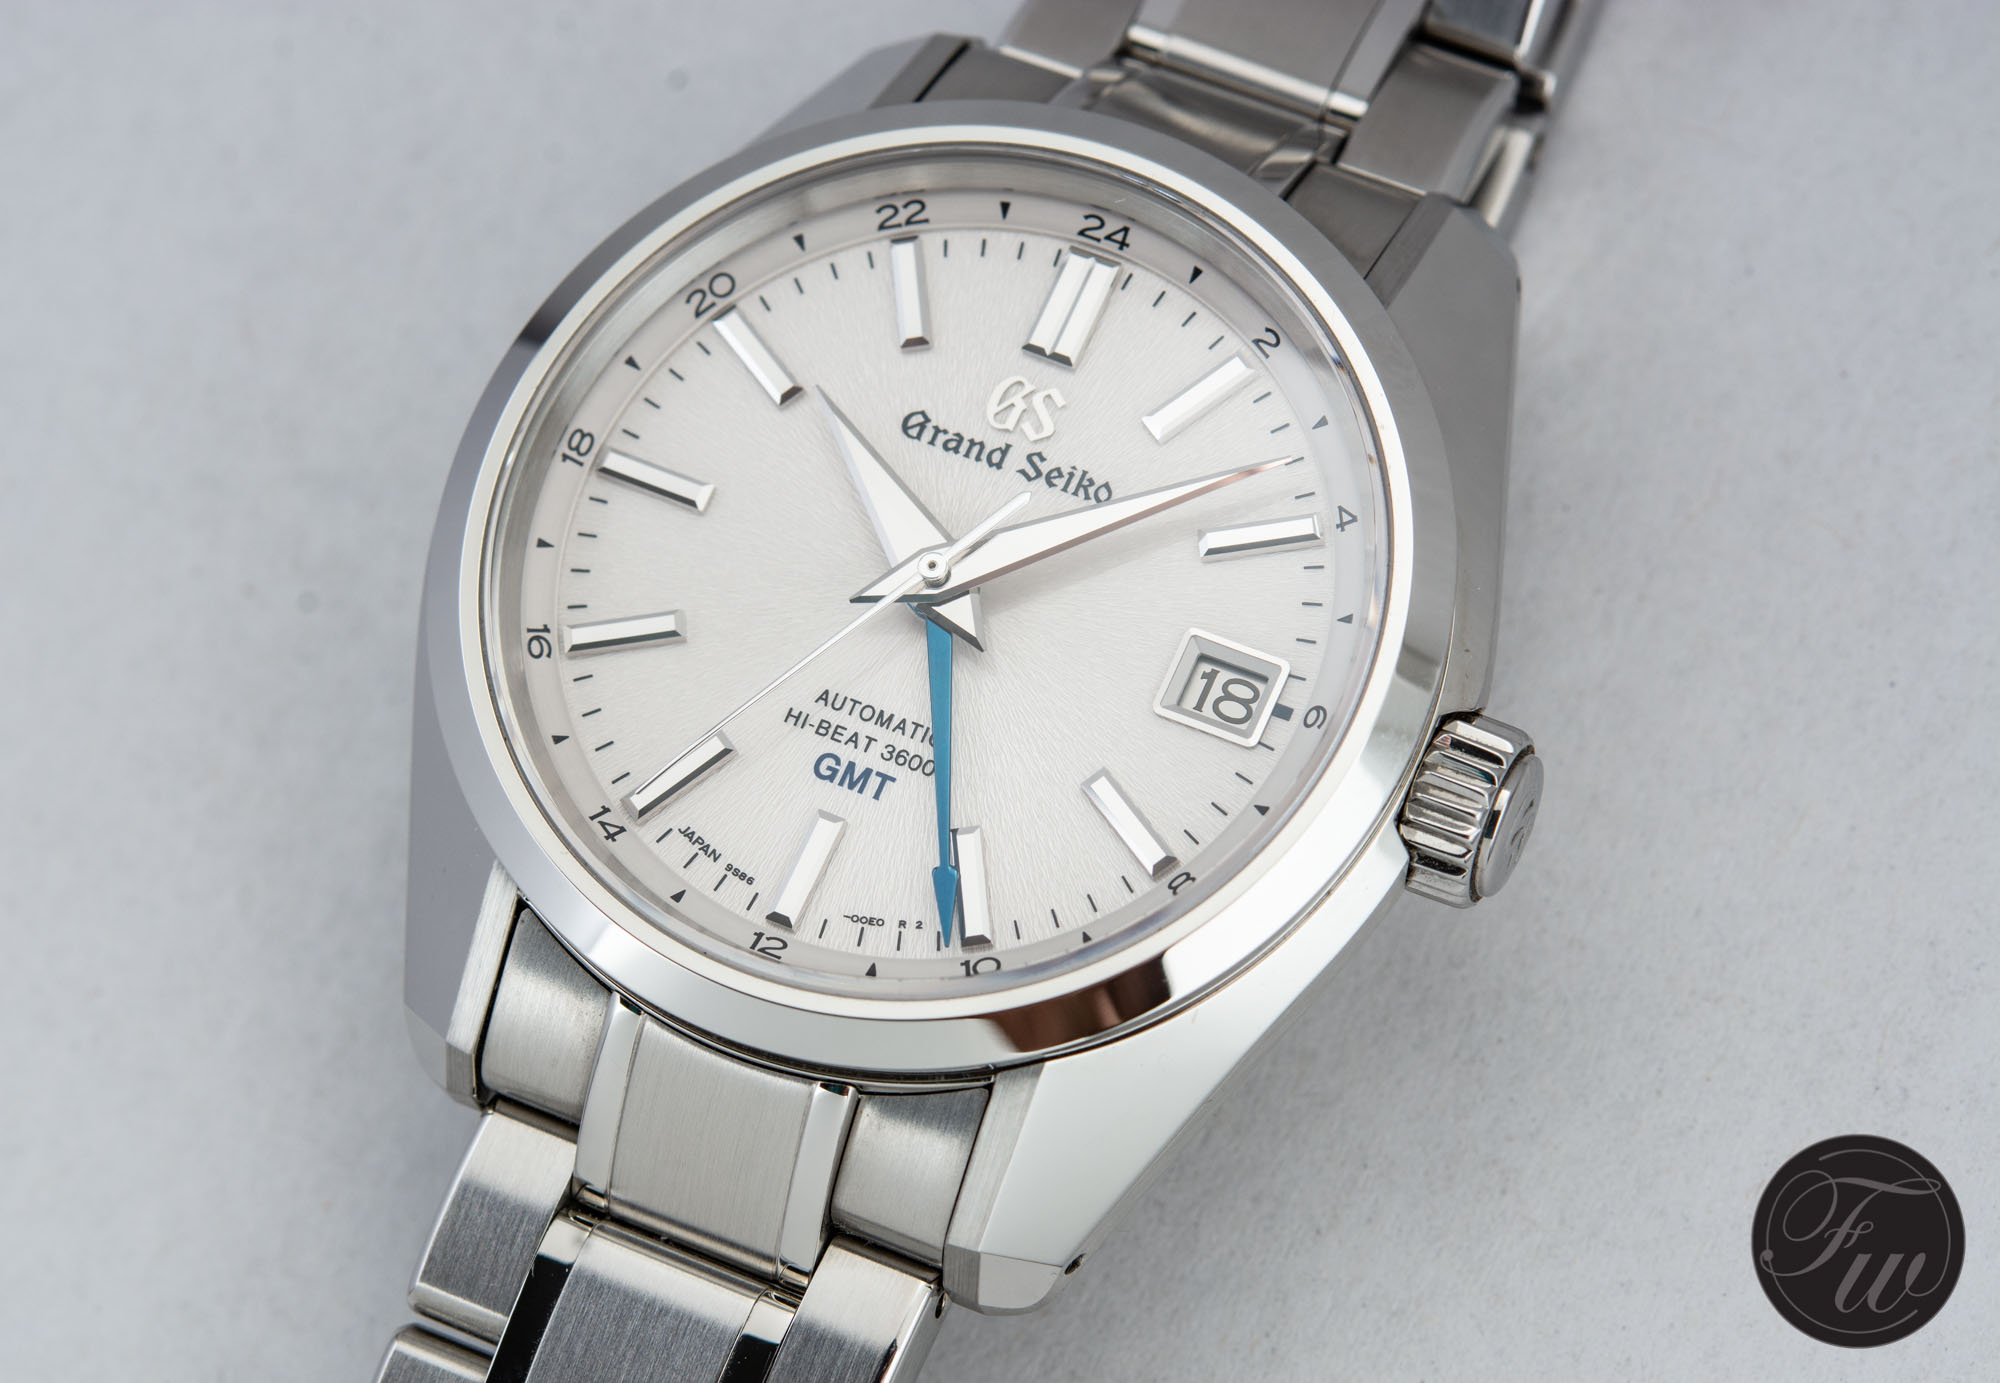 Why I Bought The Grand Seiko SBGJ201 (And Love It)